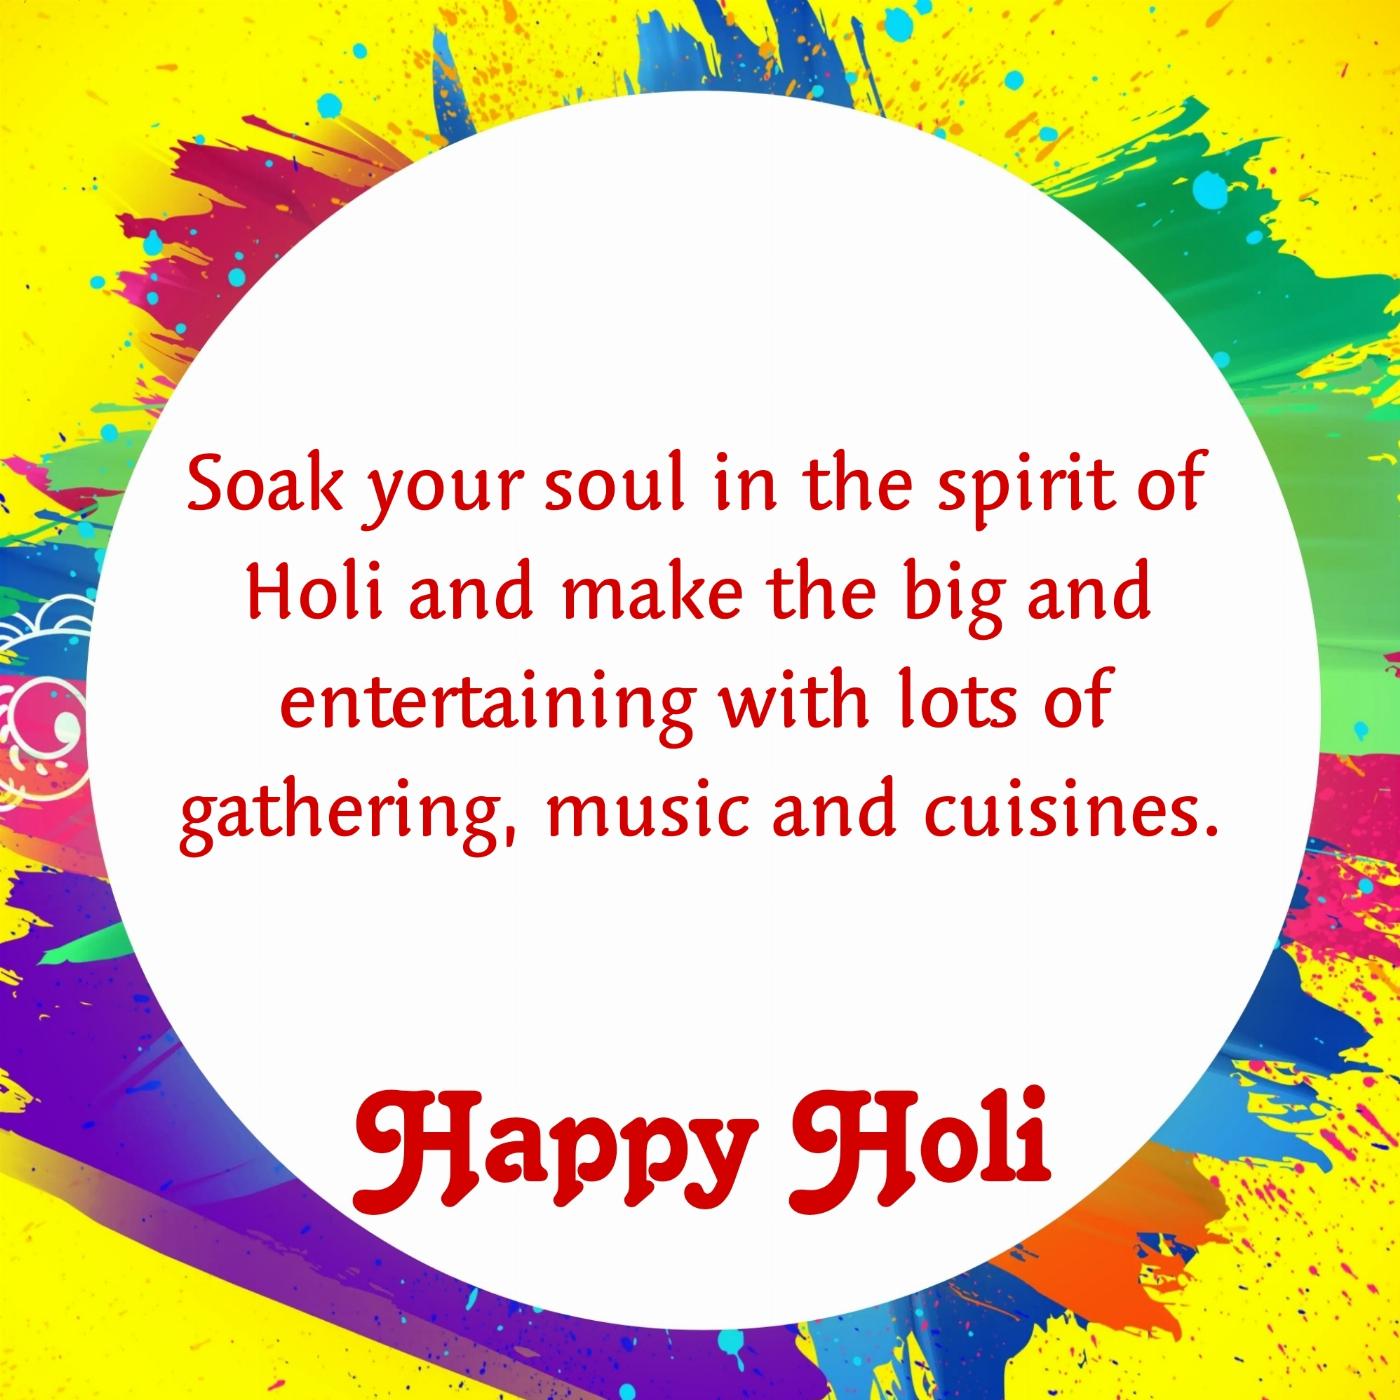 Soak your soul in the spirit of Holi and make the big